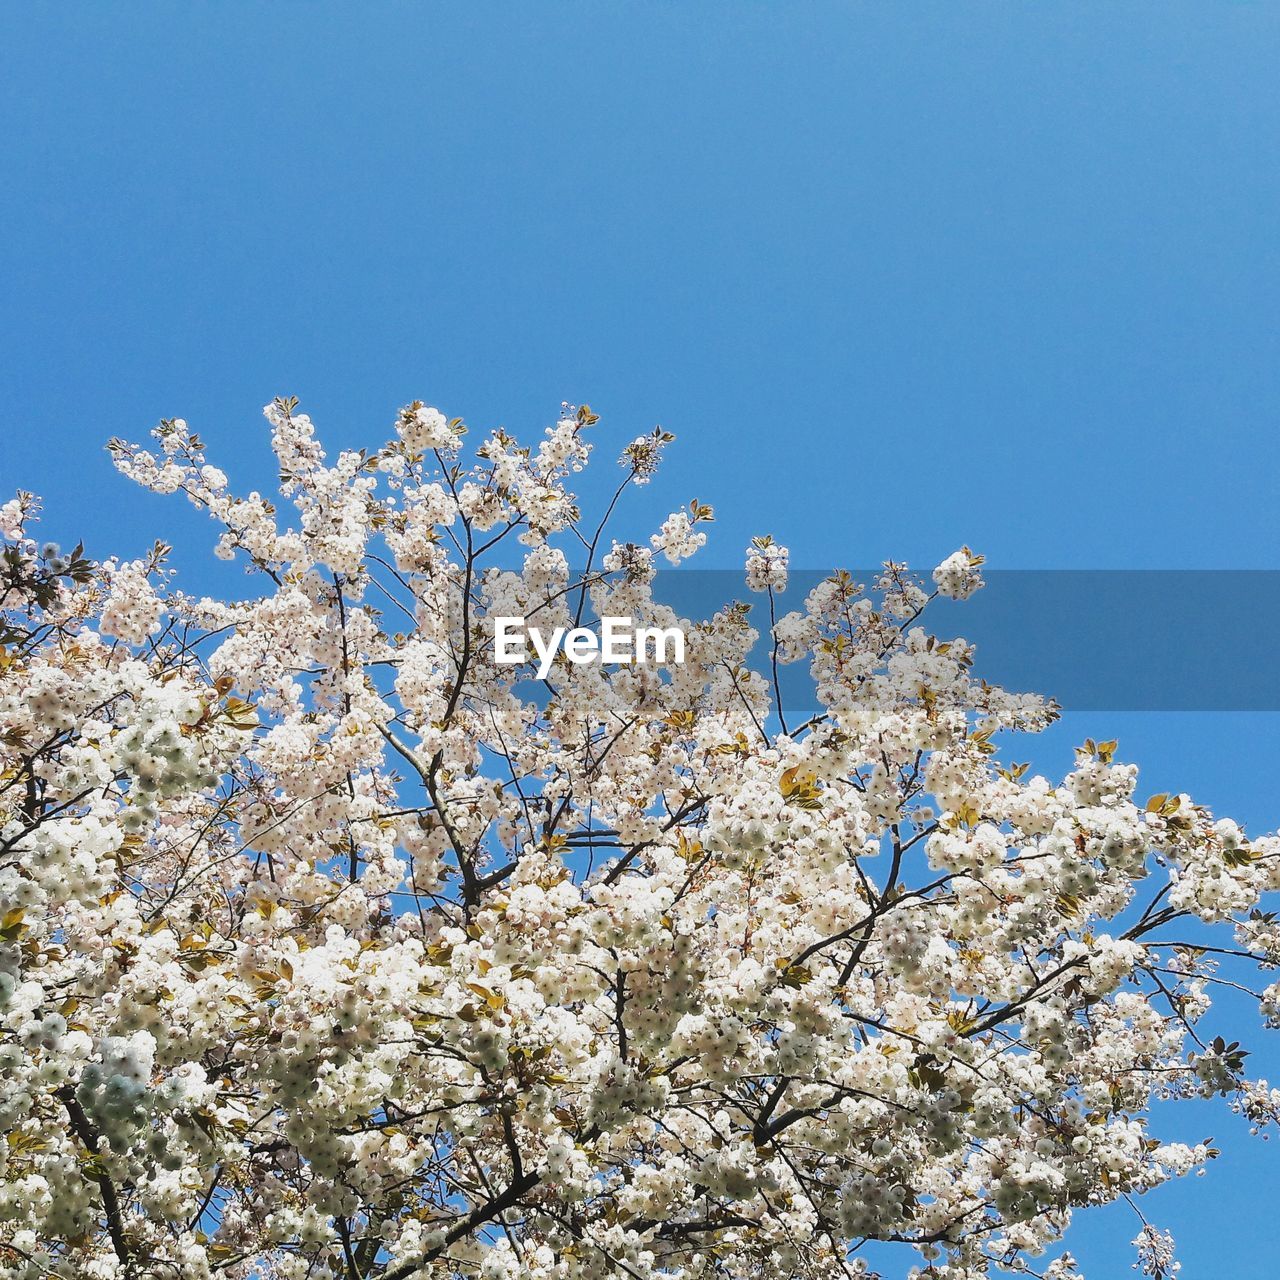 LOW ANGLE VIEW OF FLOWER TREE AGAINST BLUE SKY